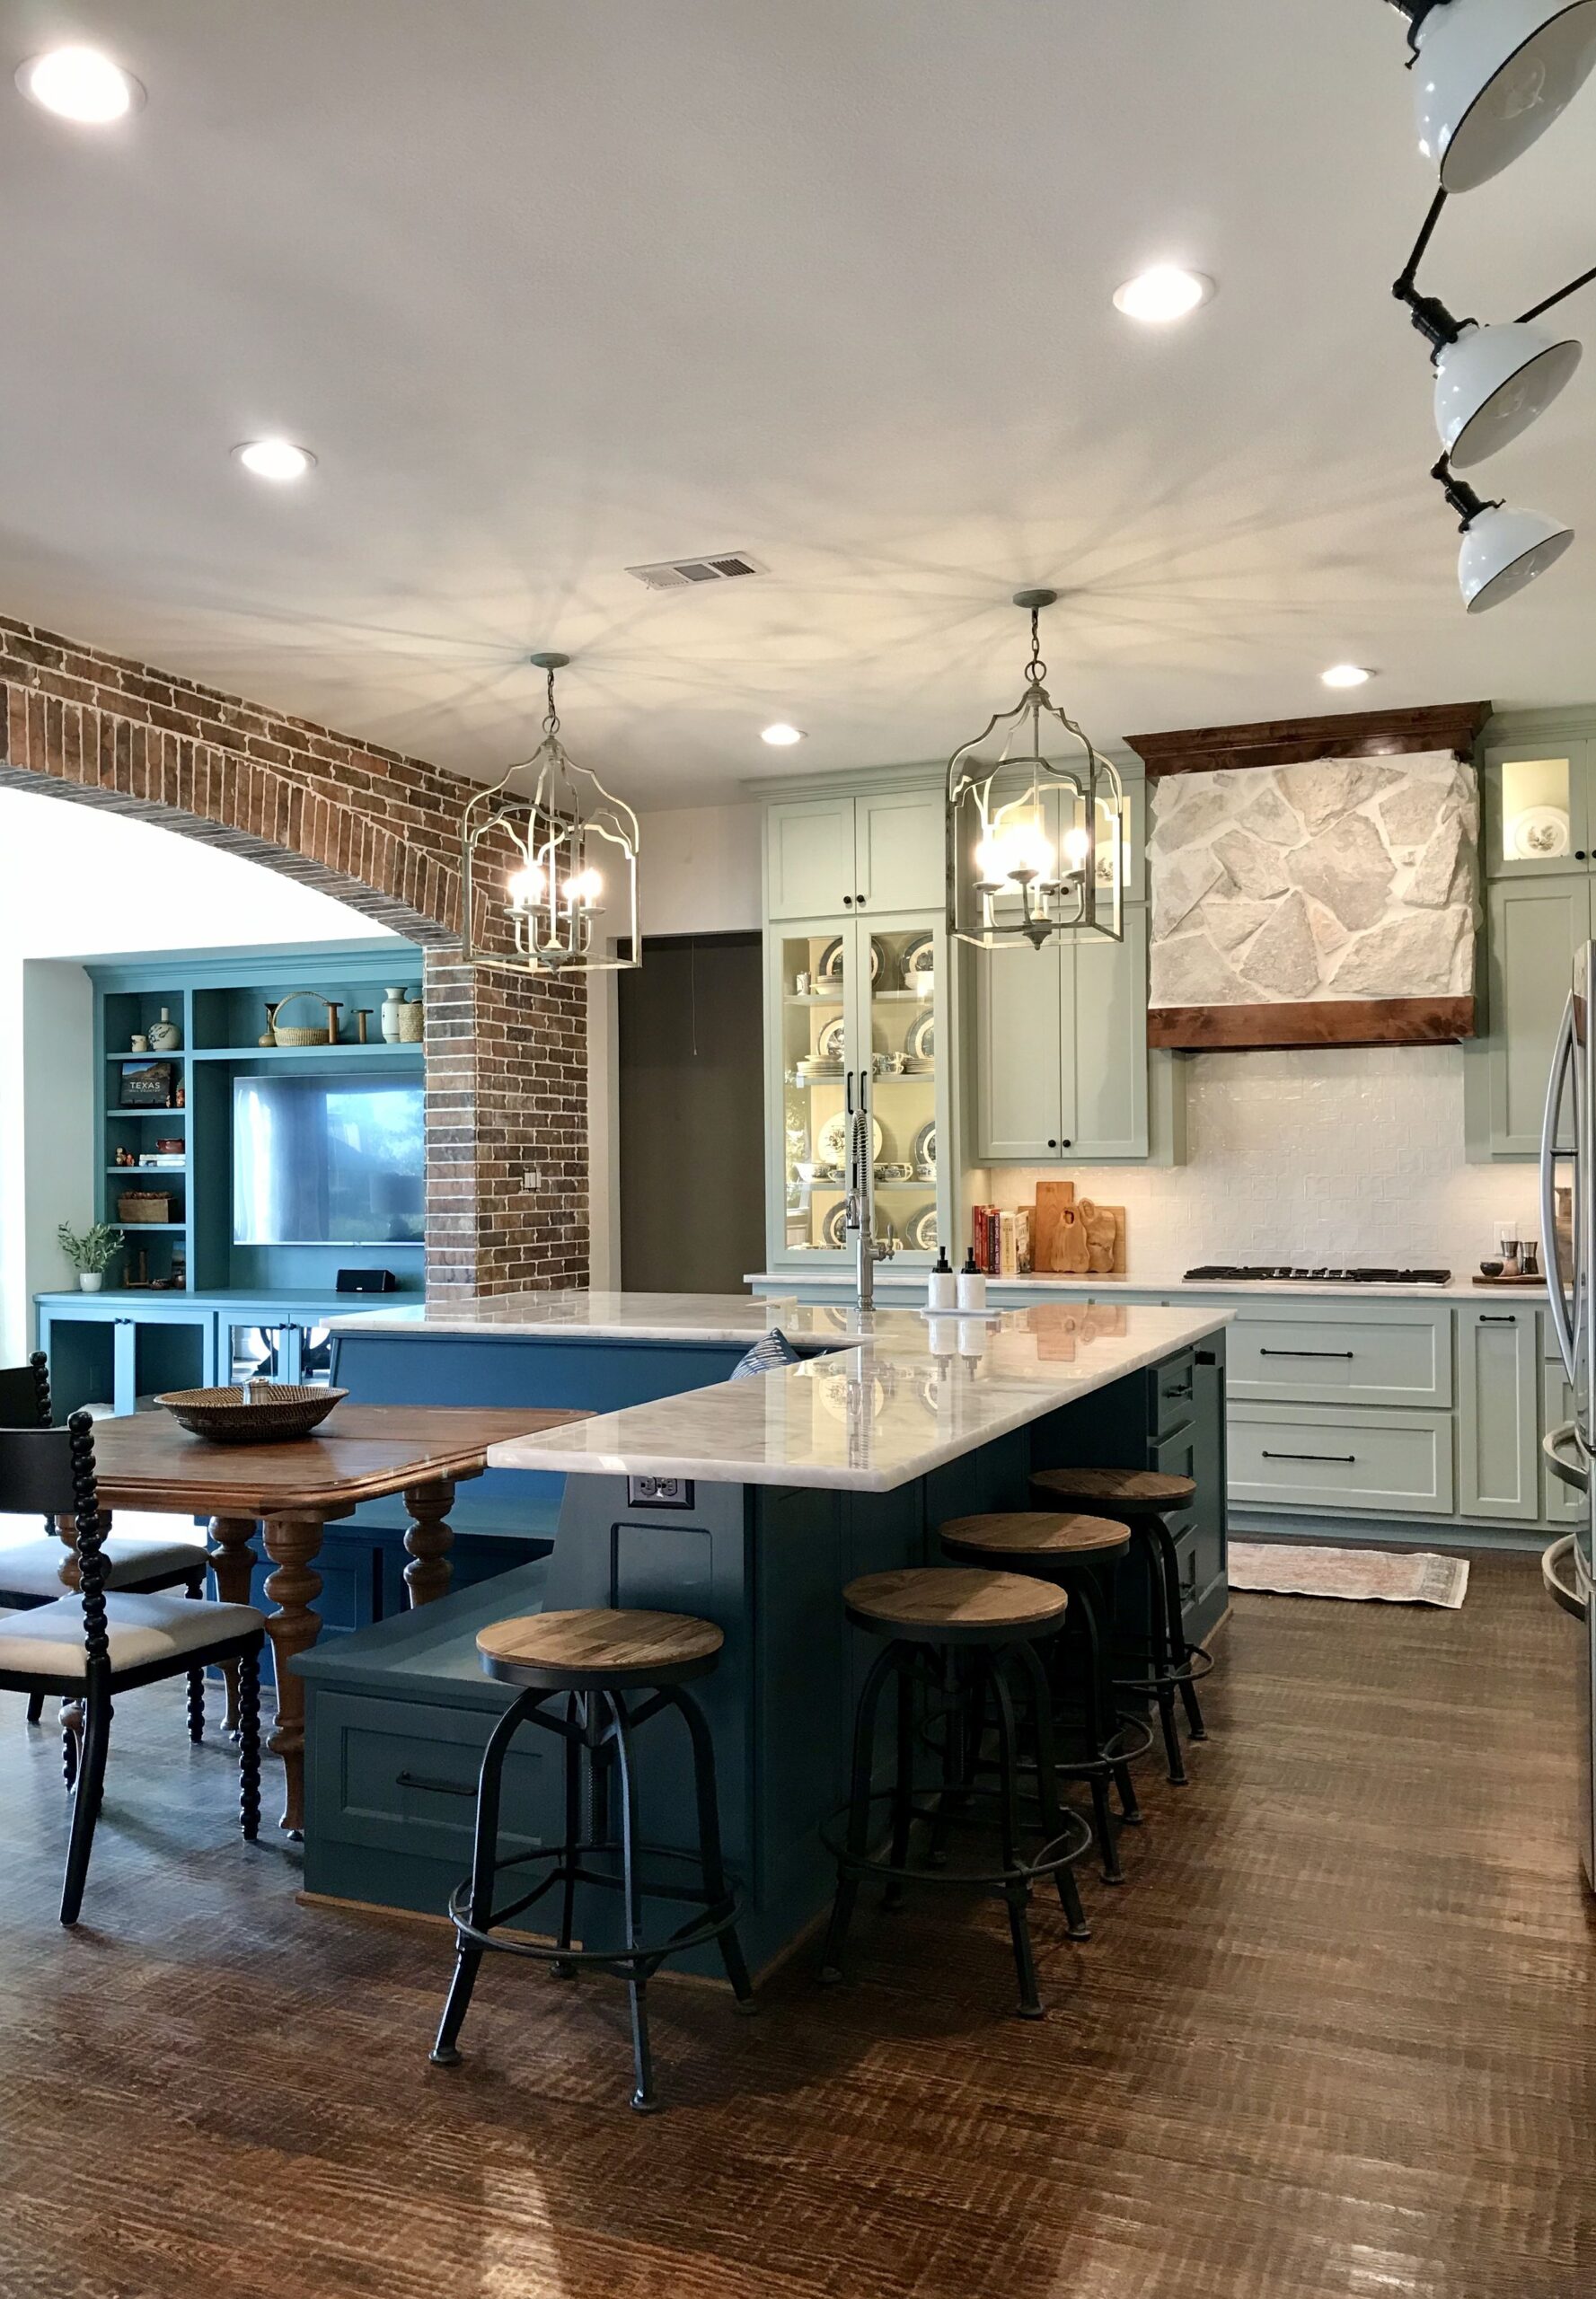 Kitchen Island Designs with Seating for Four: The Perfect Solution for Family Gatherings